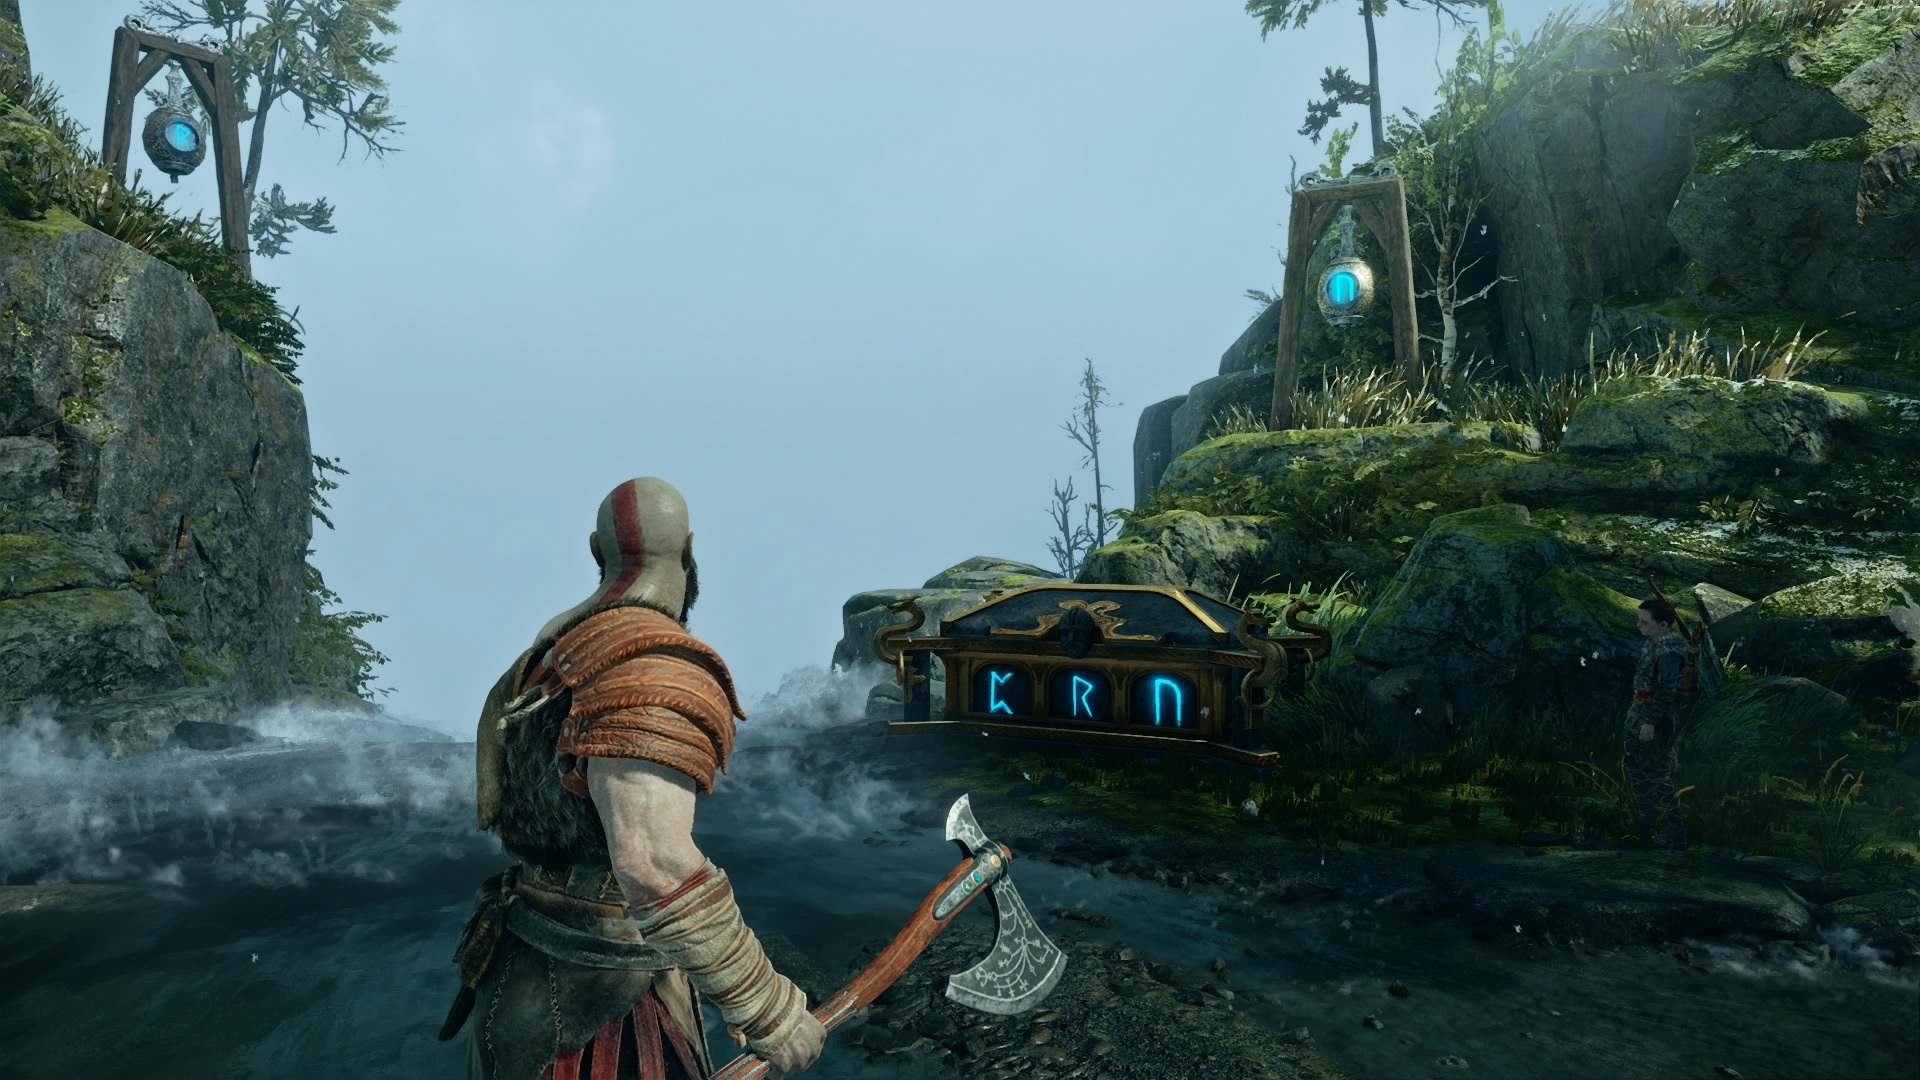 God of War - Lookout Tower Collectible Locations